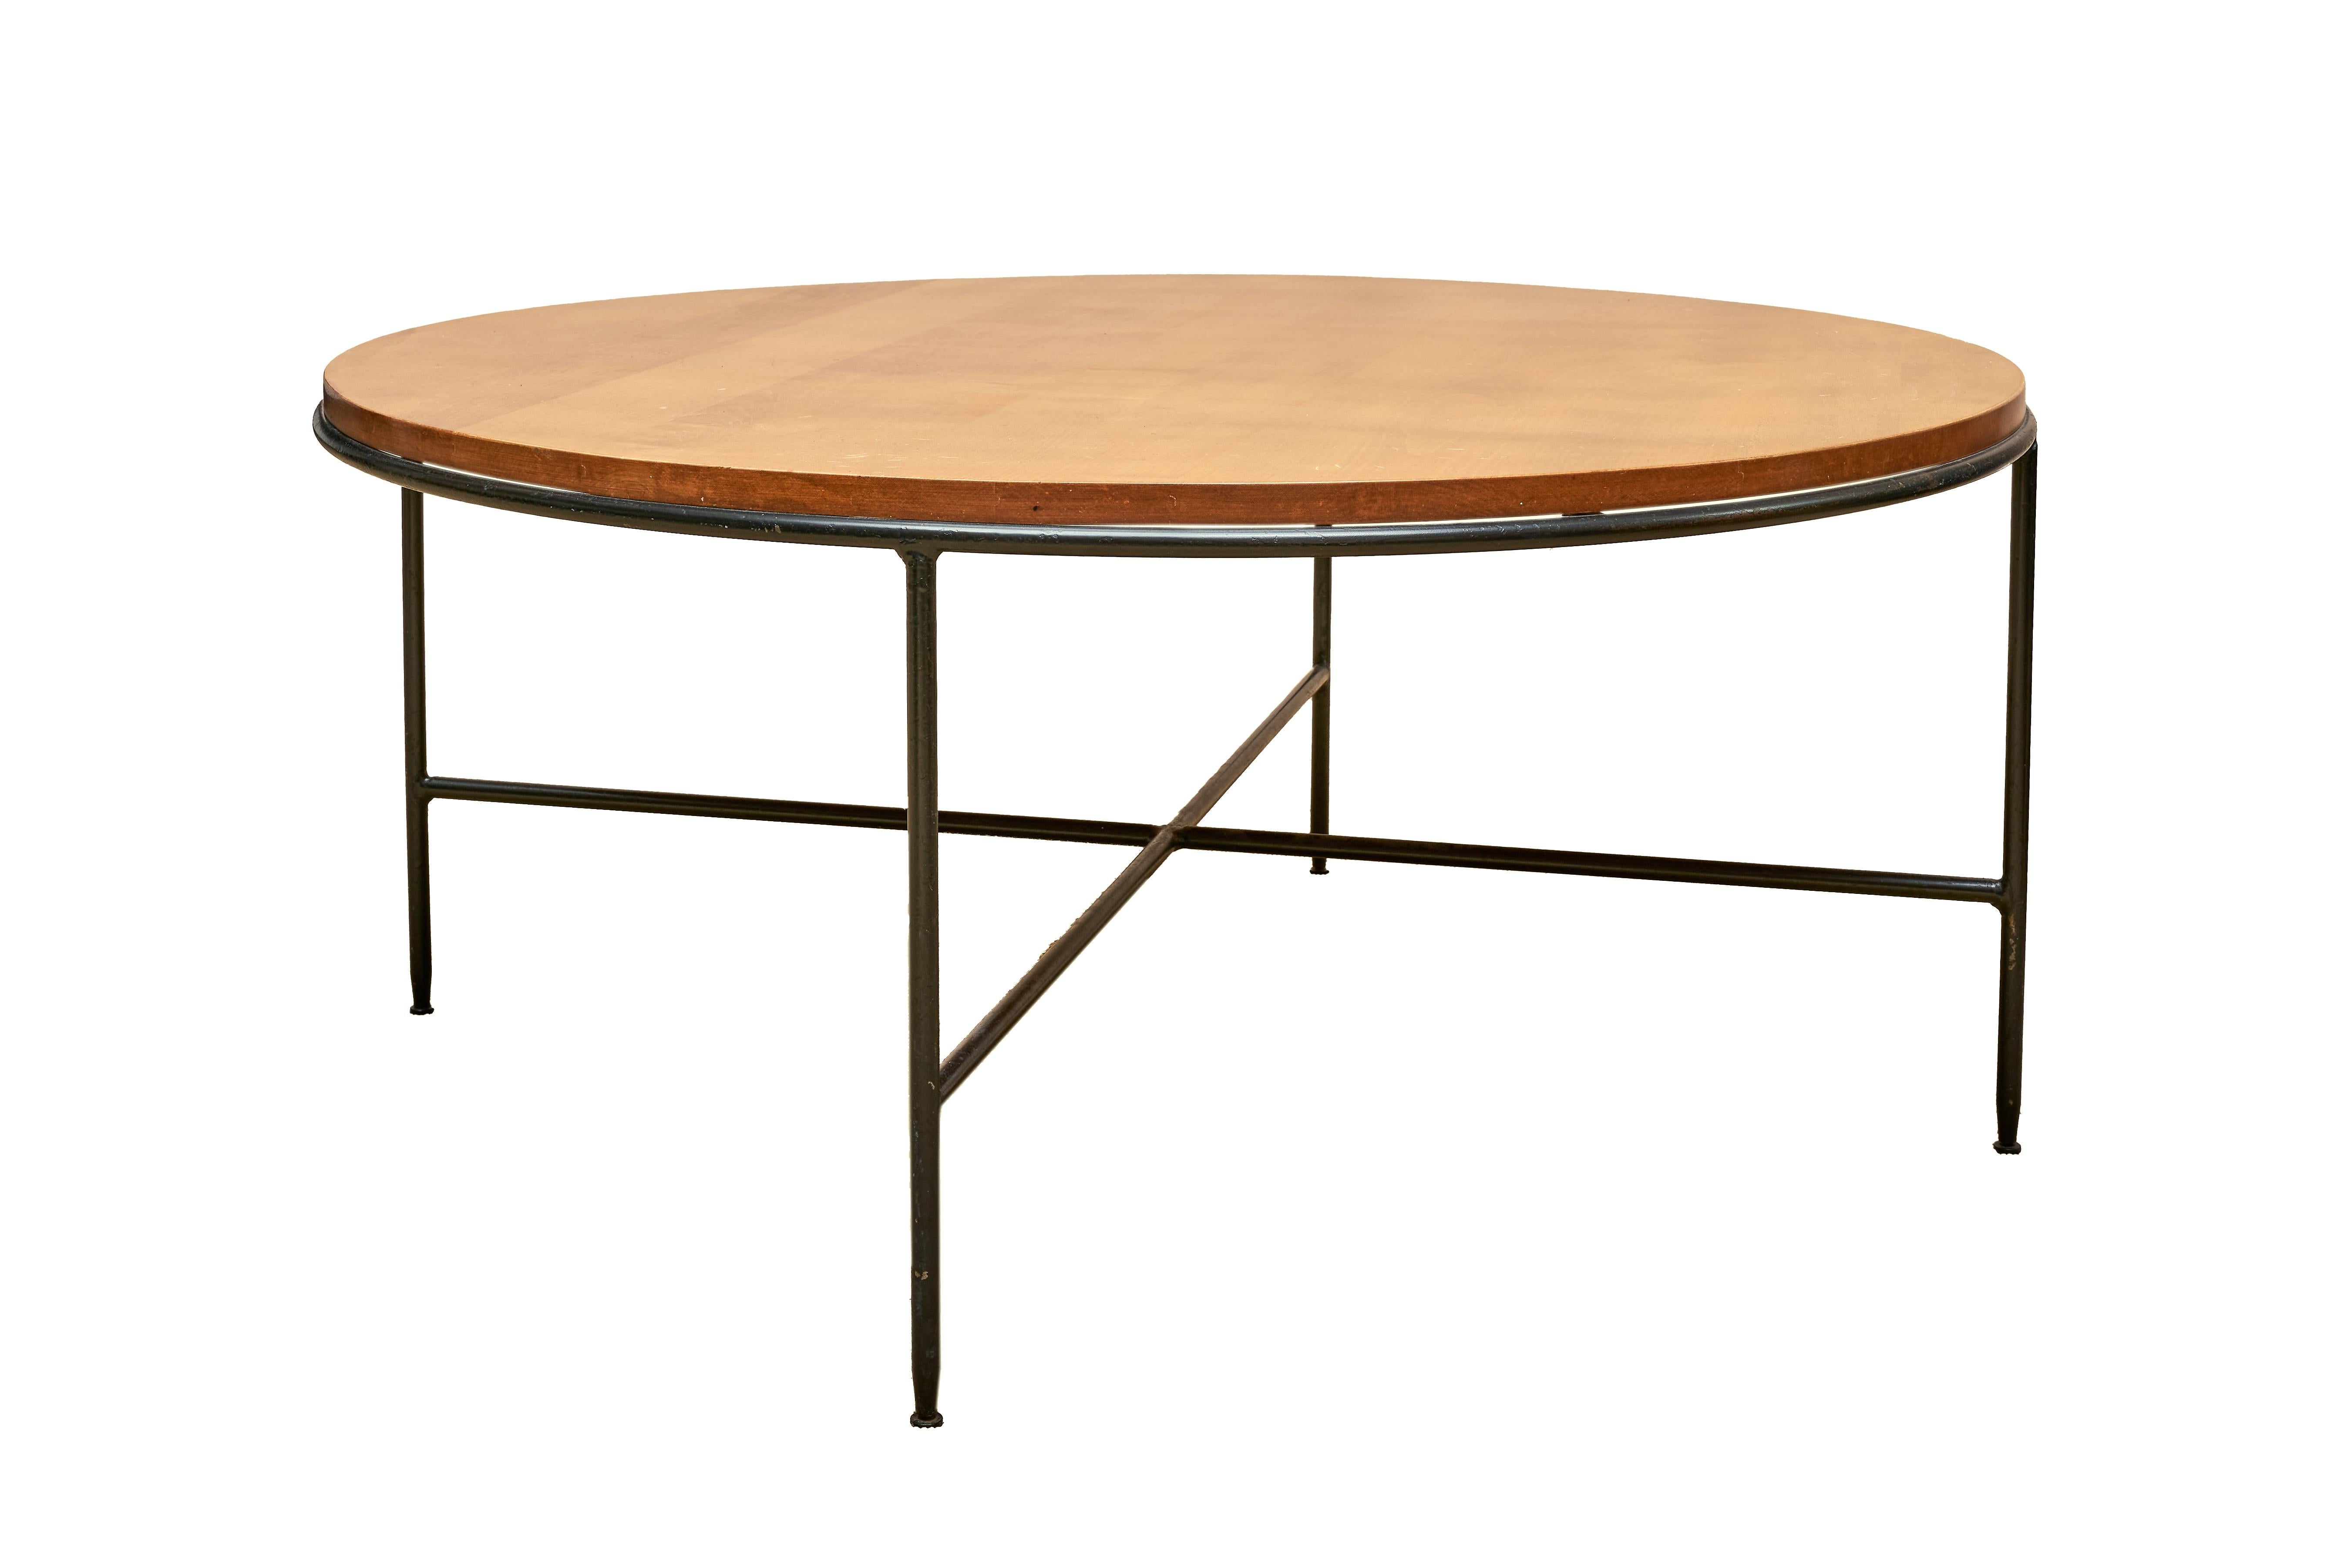 This Paul McCobb Round Coffee Table was crafted for the renowned Wichendon Furniture Company and is a timeless piece of mid-century design. This exceptional table showcases the combination of a solid birch top and a wrought iron base, resulting in a